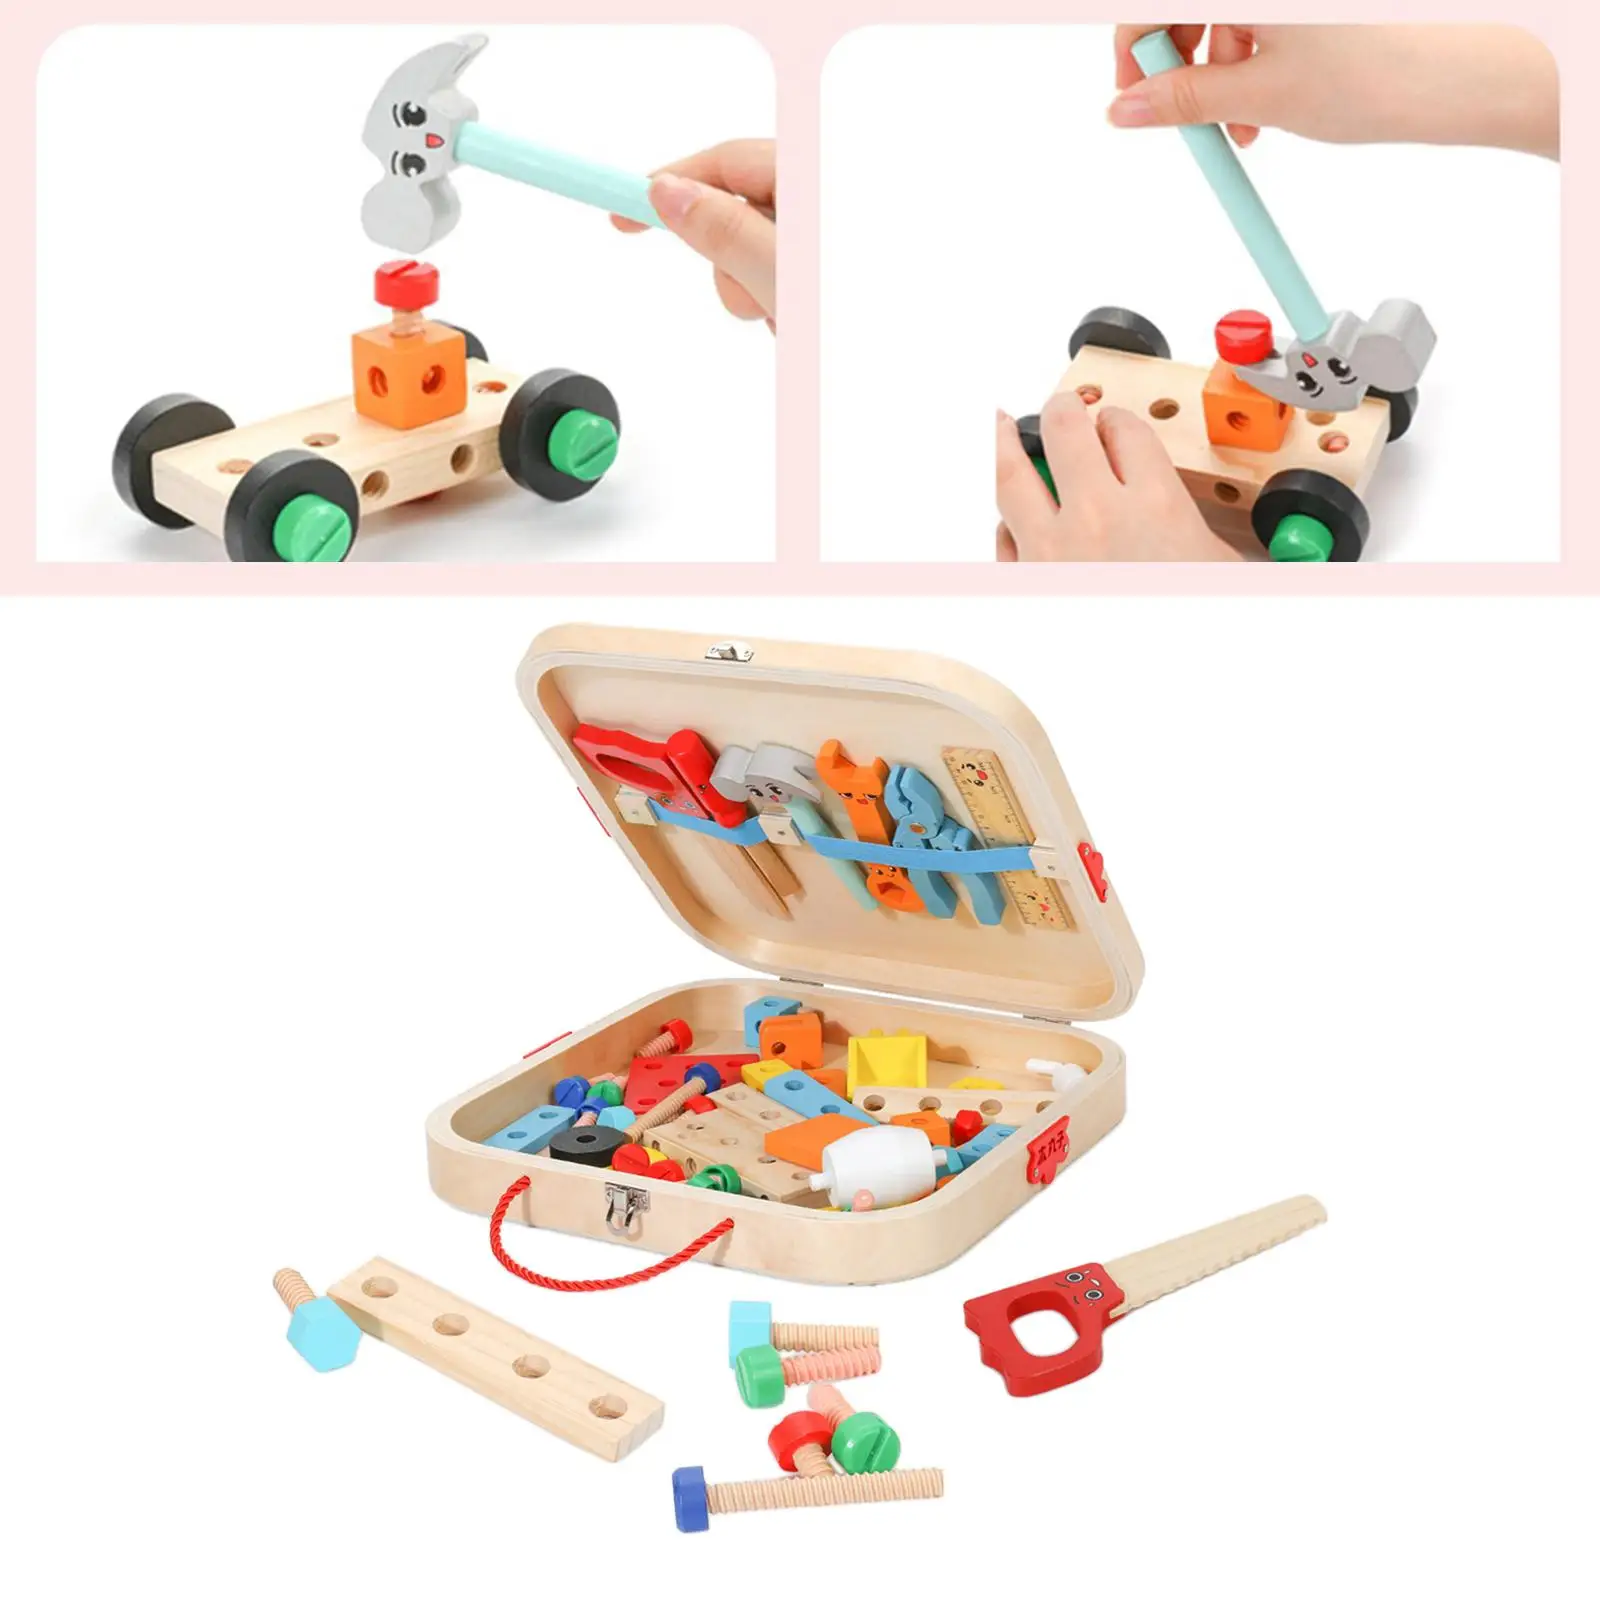 Kids Tool Set Toy Tools Pretend Play Montessori Educational Toy Wooden Tool Box for Living Room Birthday Gift Home DIY Bedroom